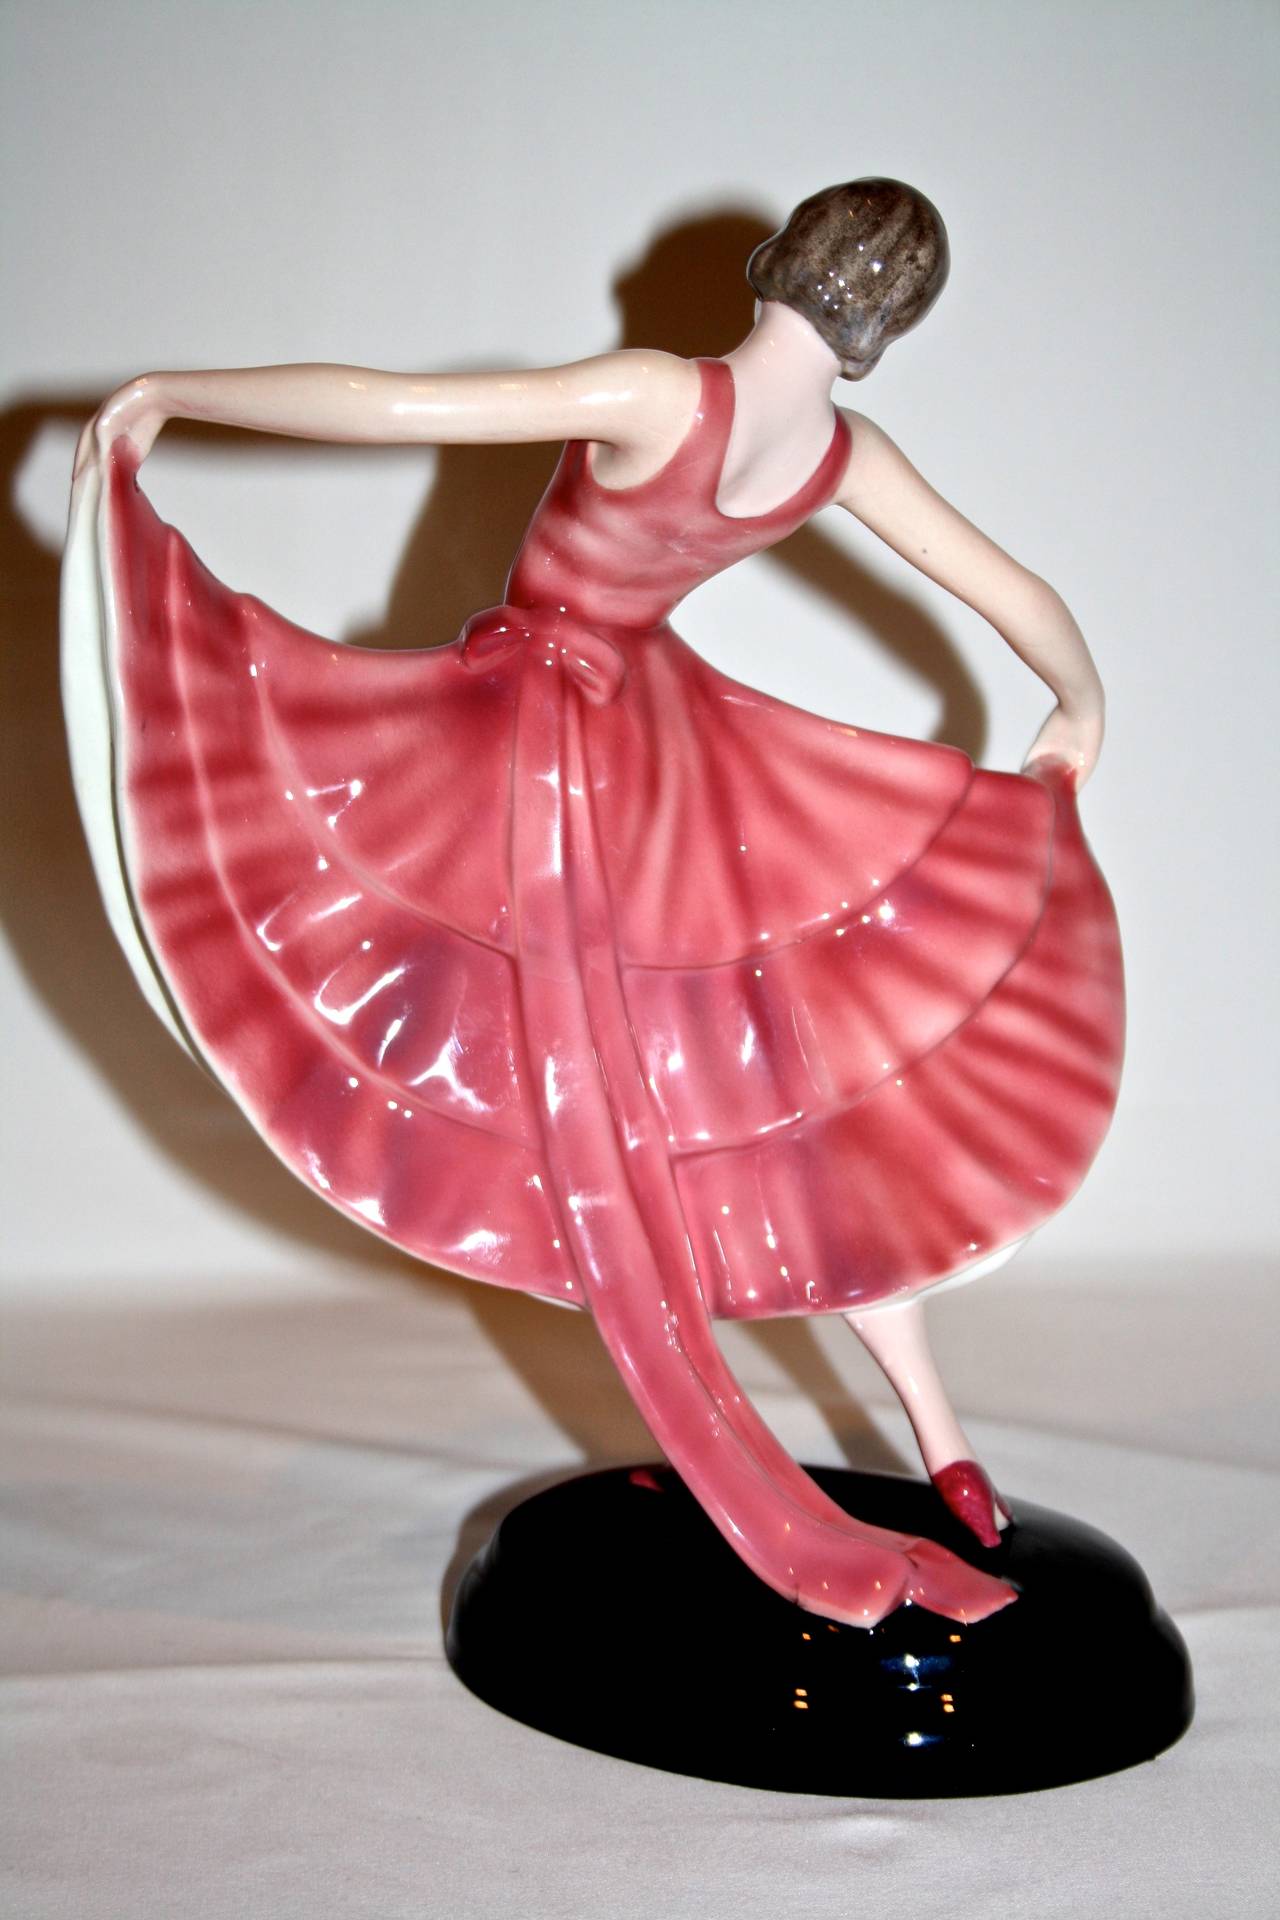 Here we have a wonderful figure by Stephan Dakon for Goldscheider ceramics
made in Austria, circa 1930 Model number 6020.
She wears a highly stylized pink dress with a multitude of hand-painted flowers
the figure also features a polychrome